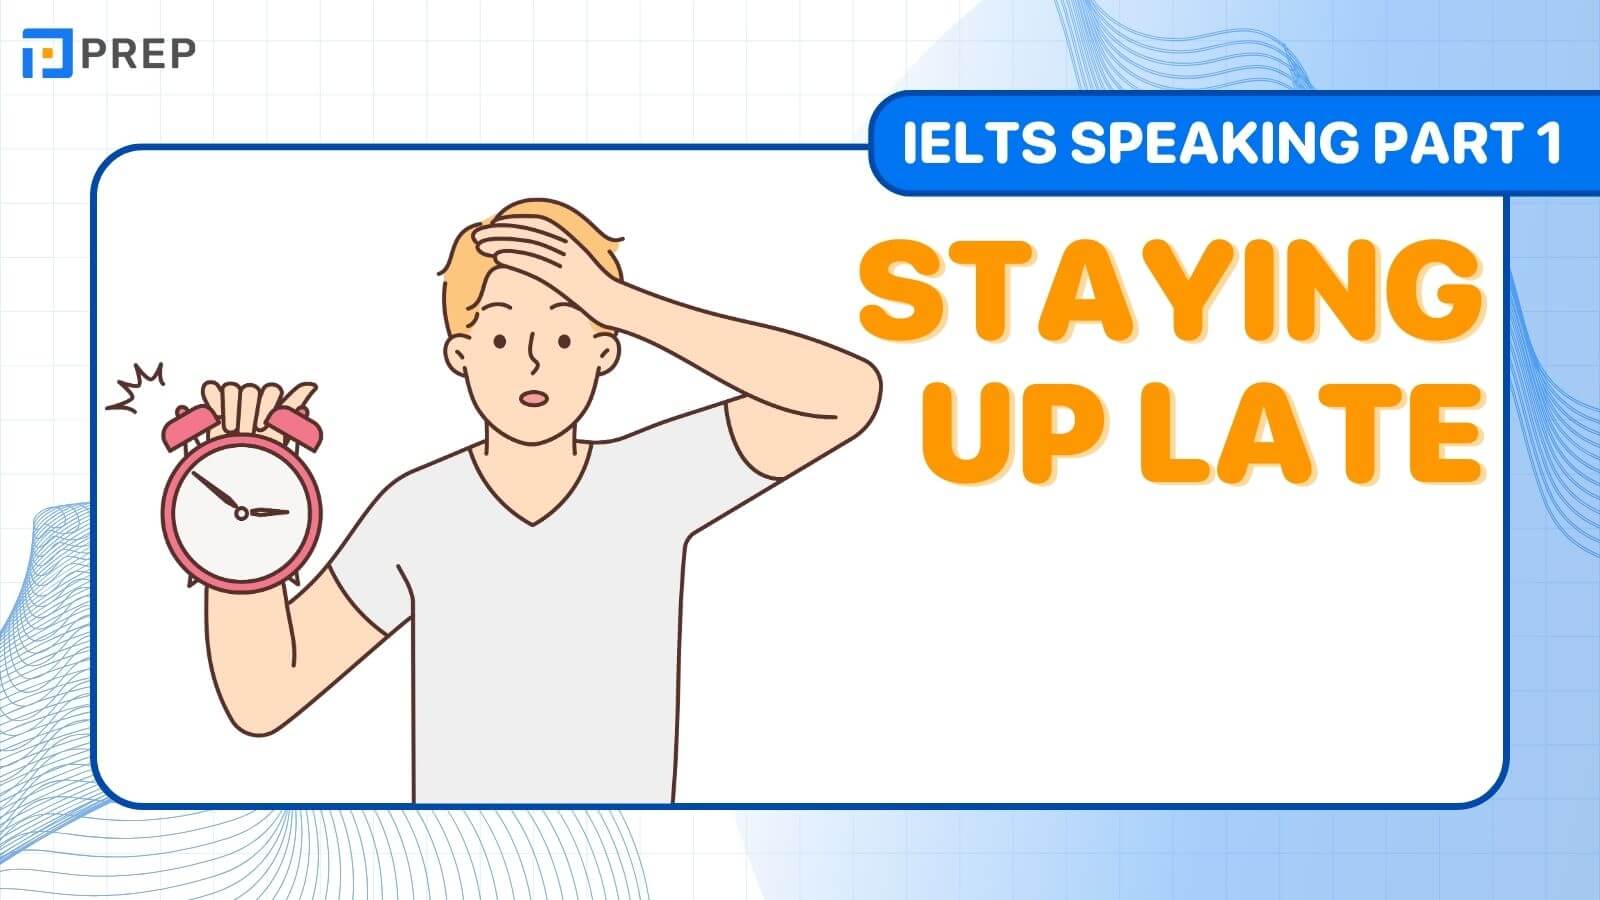 IELTS Speaking Part 1 Stay up late